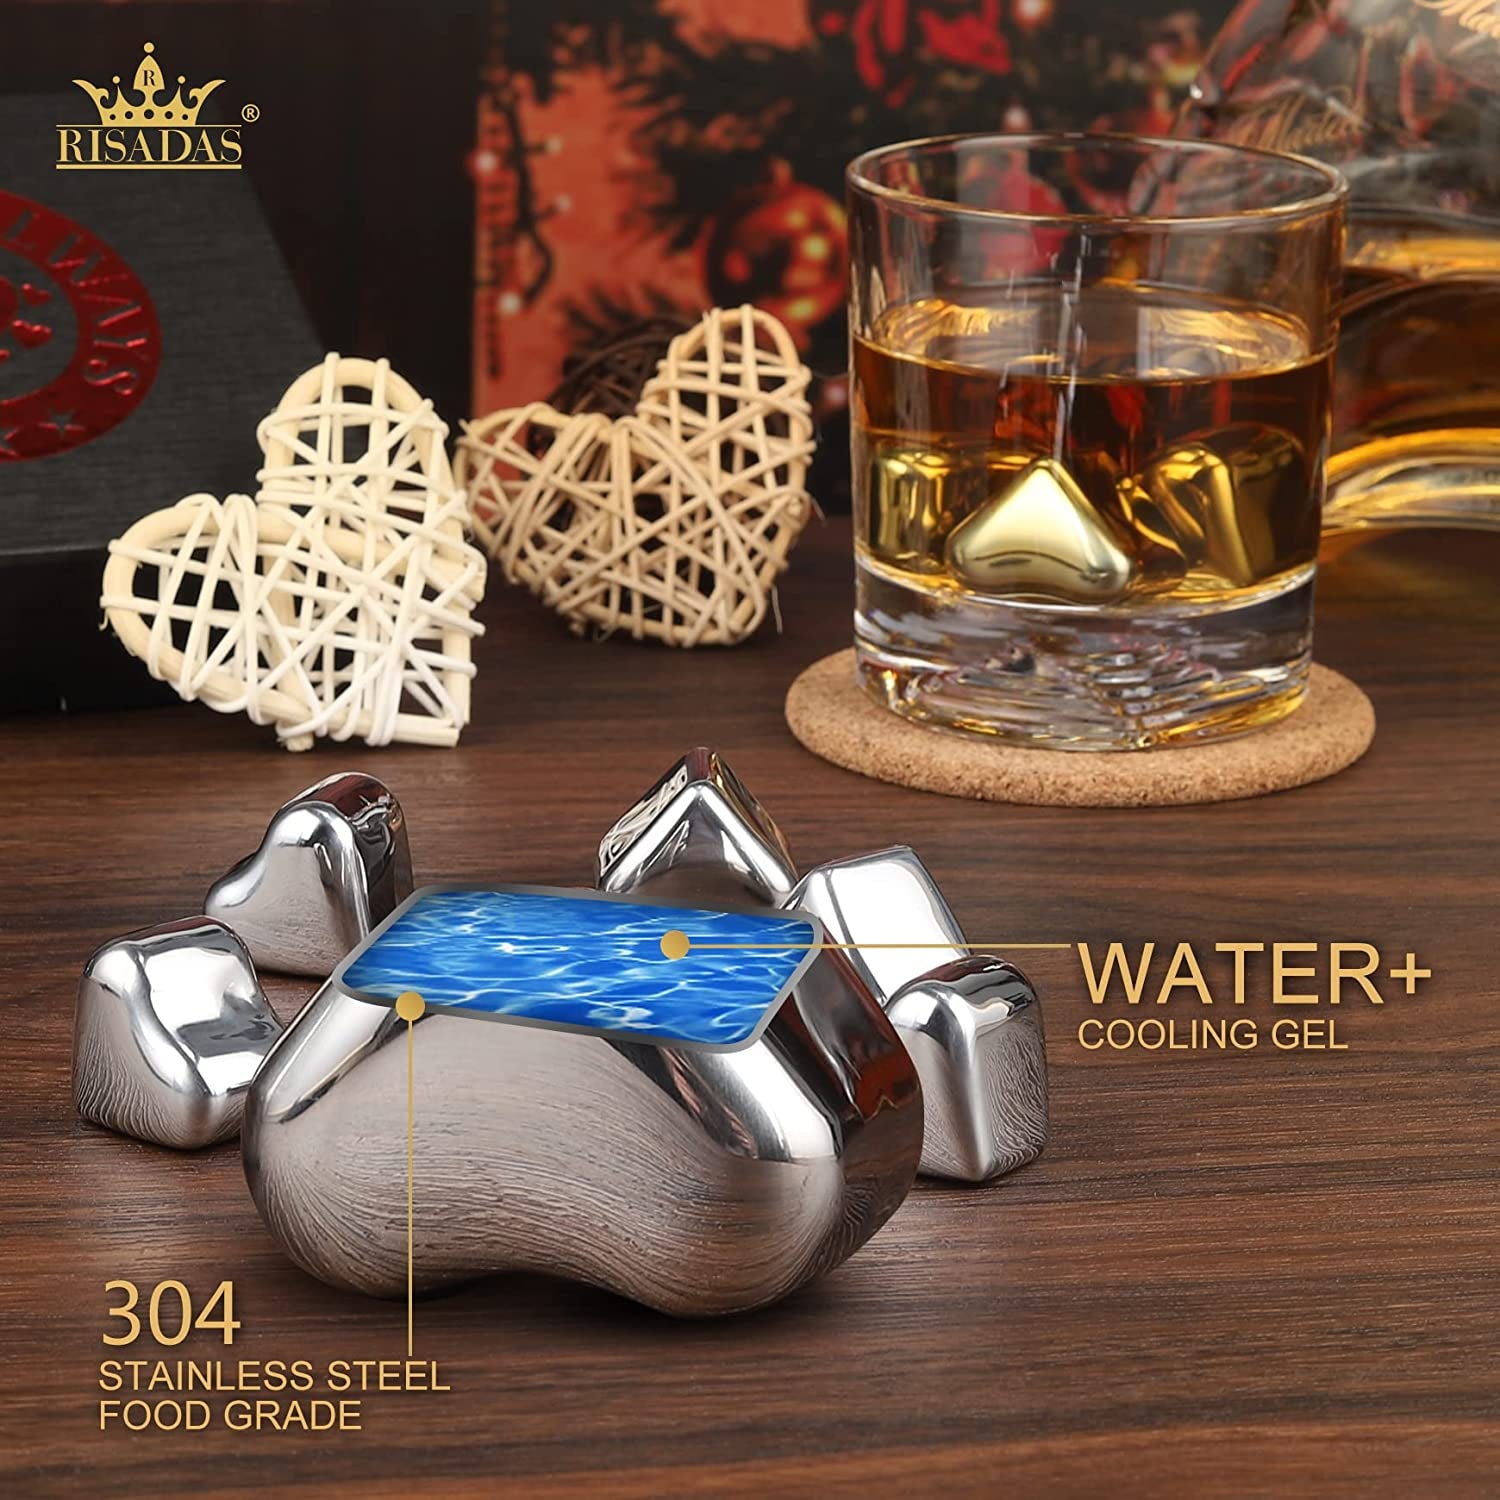 Whiskey Stones for Chilling Whiskey